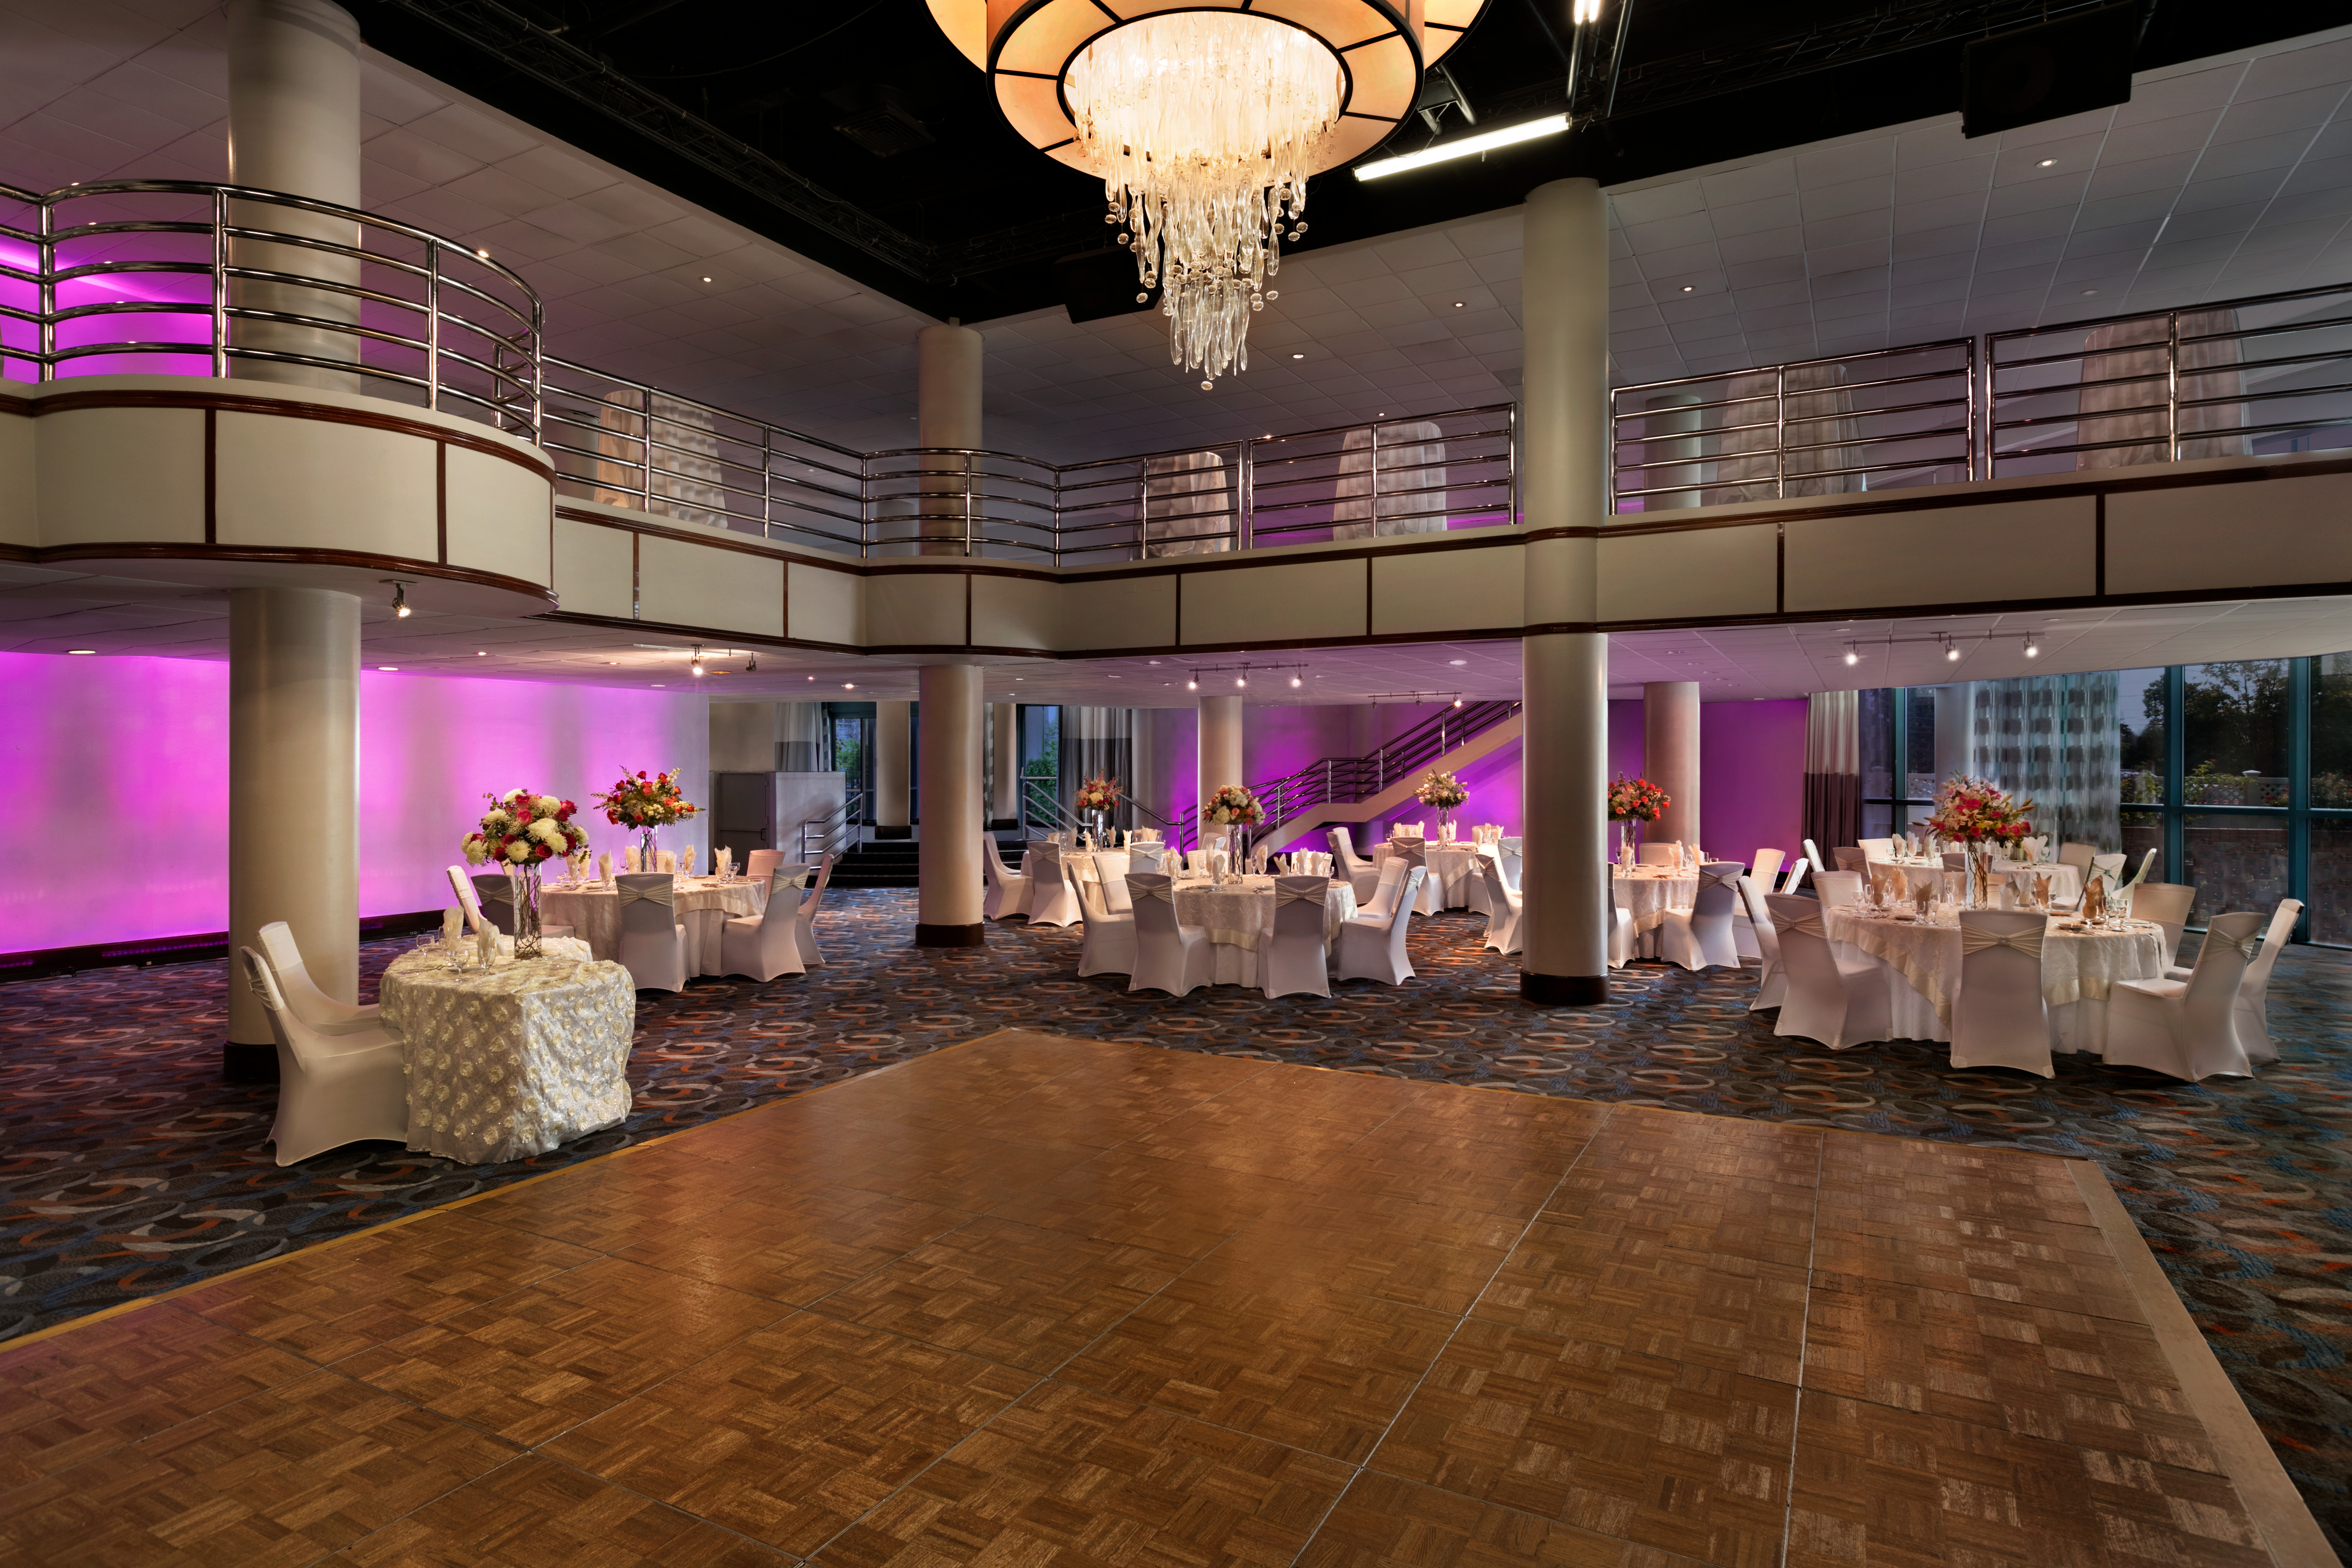  Social Setting with Seating, Tables, and Magenta Lighting in the Savoy Ballroom 